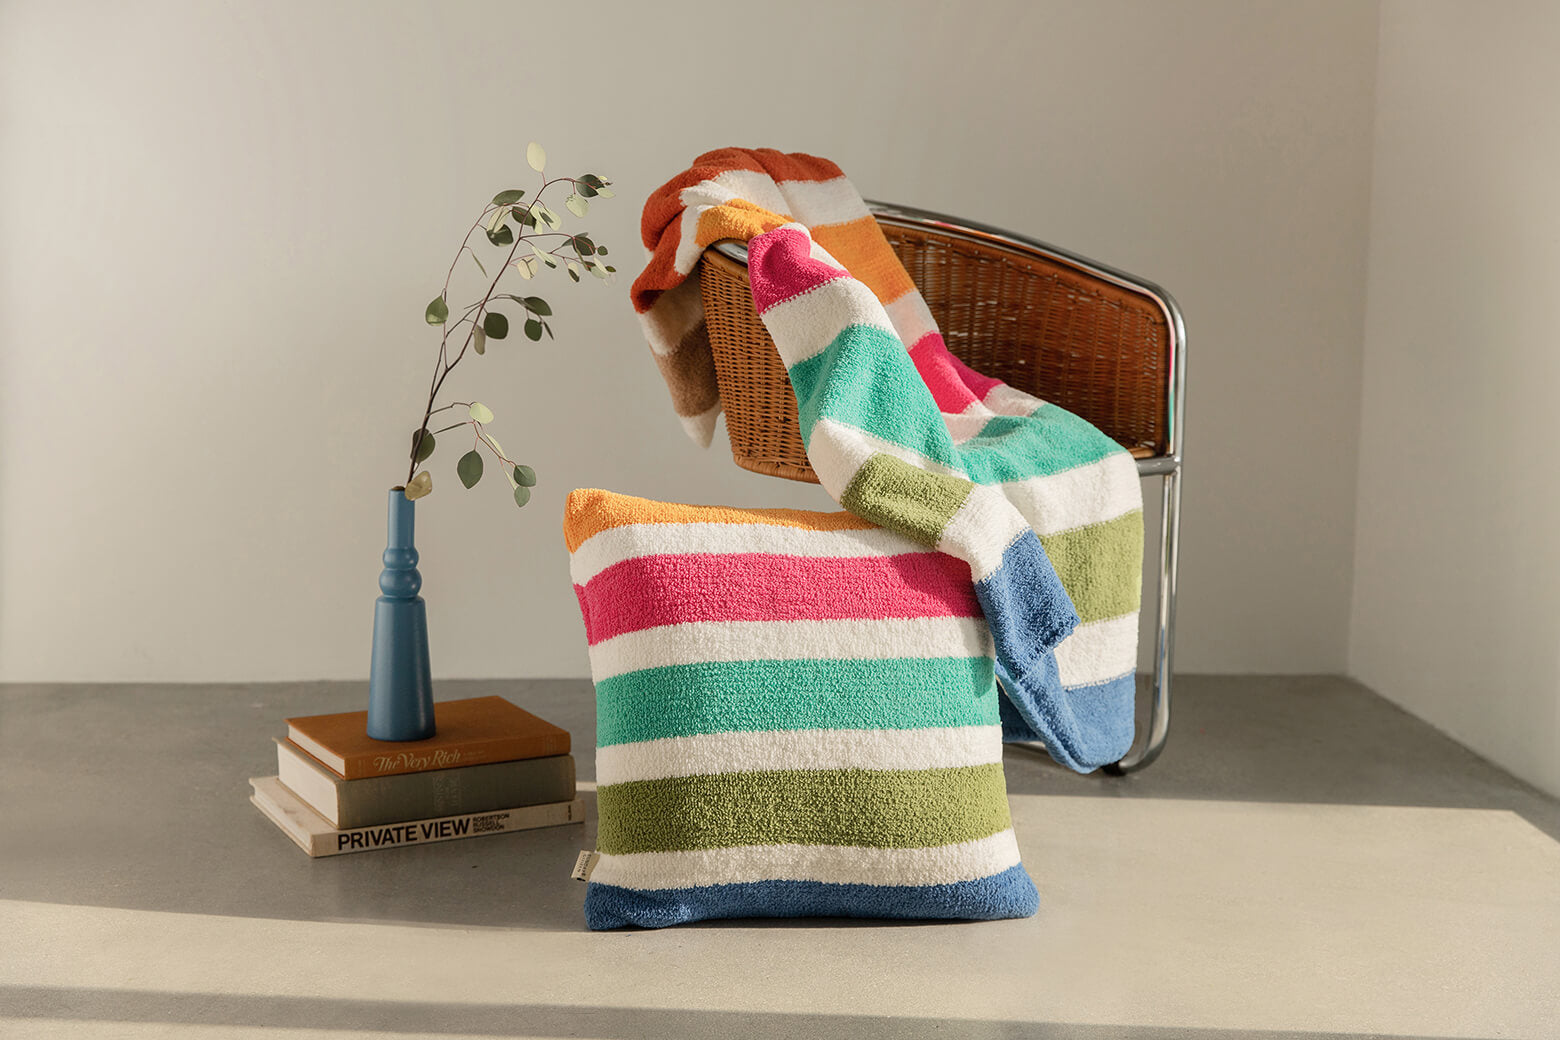 Colorful striped pillow and throw blanket. Sunday Citizen Burano Throw and Throw Pillow in Vibrant.